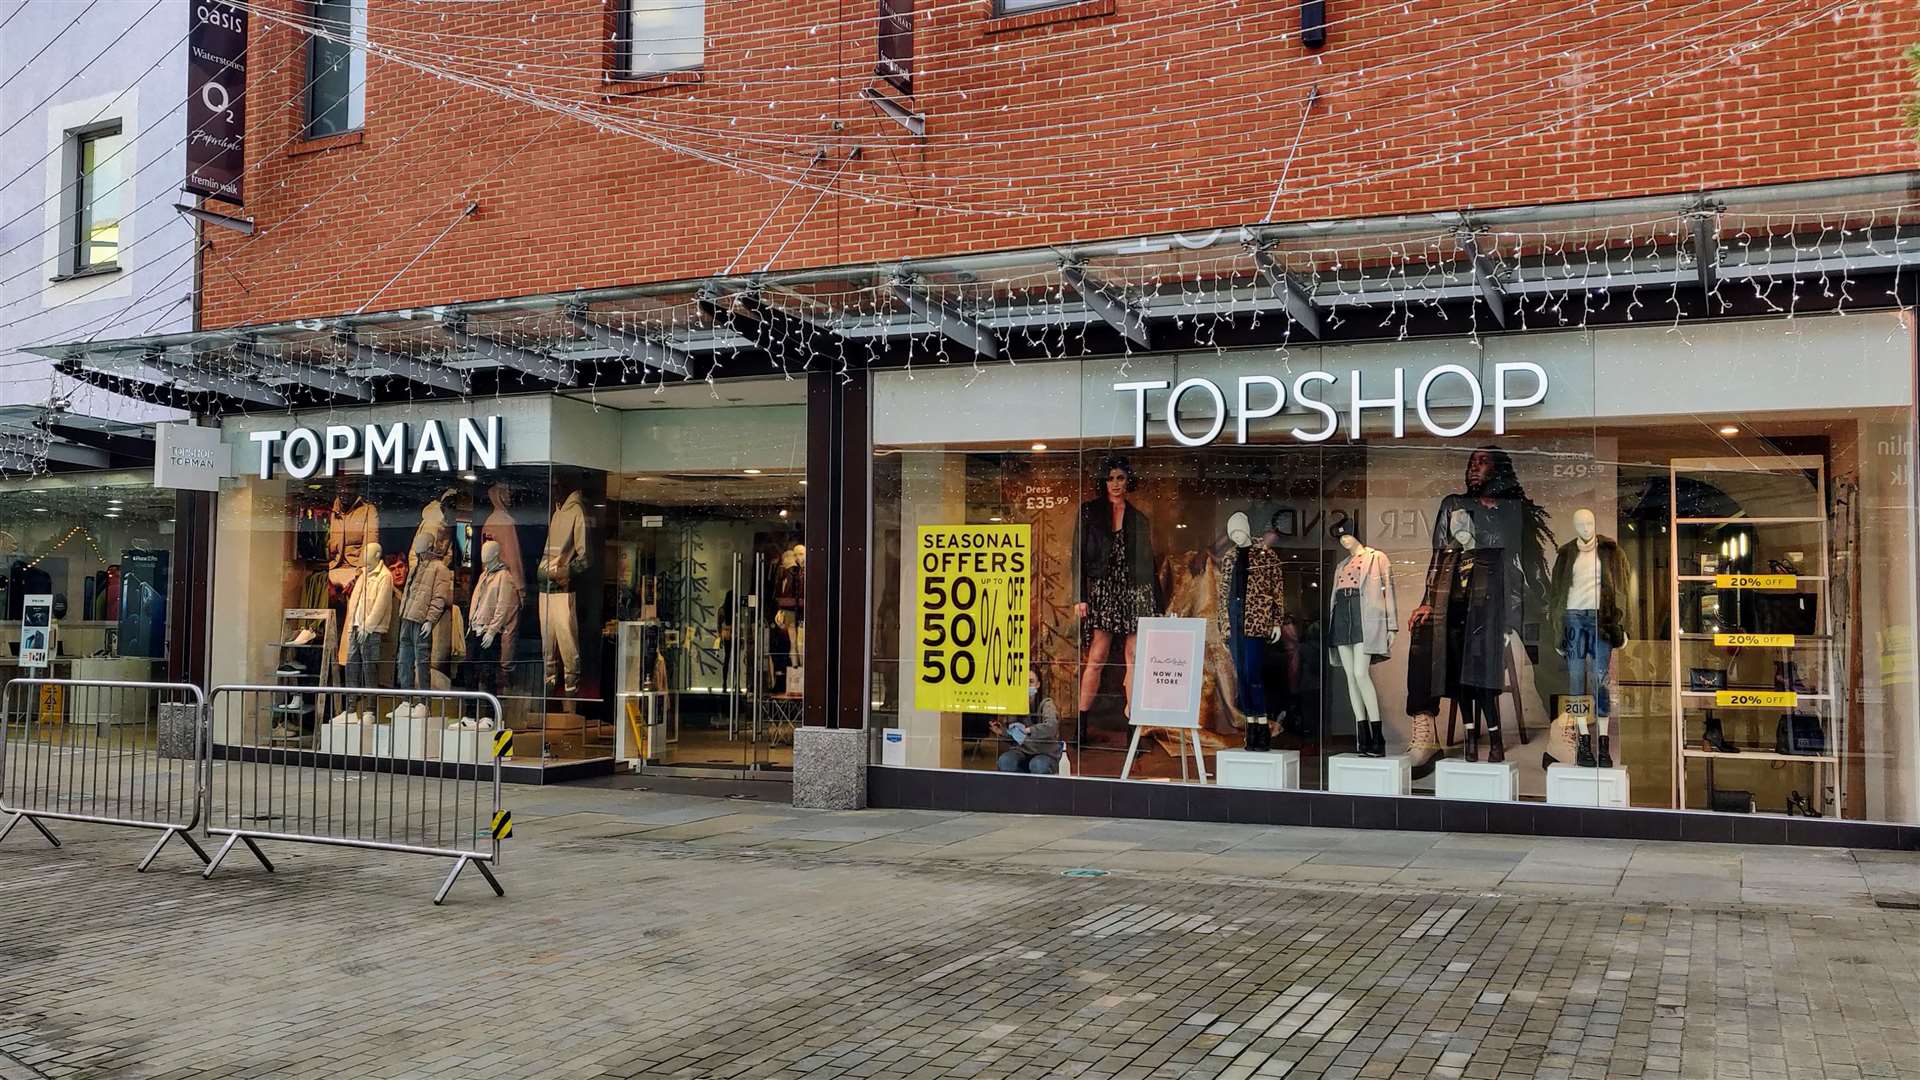 Topshop in Maidstone will close following the takeover of the brand